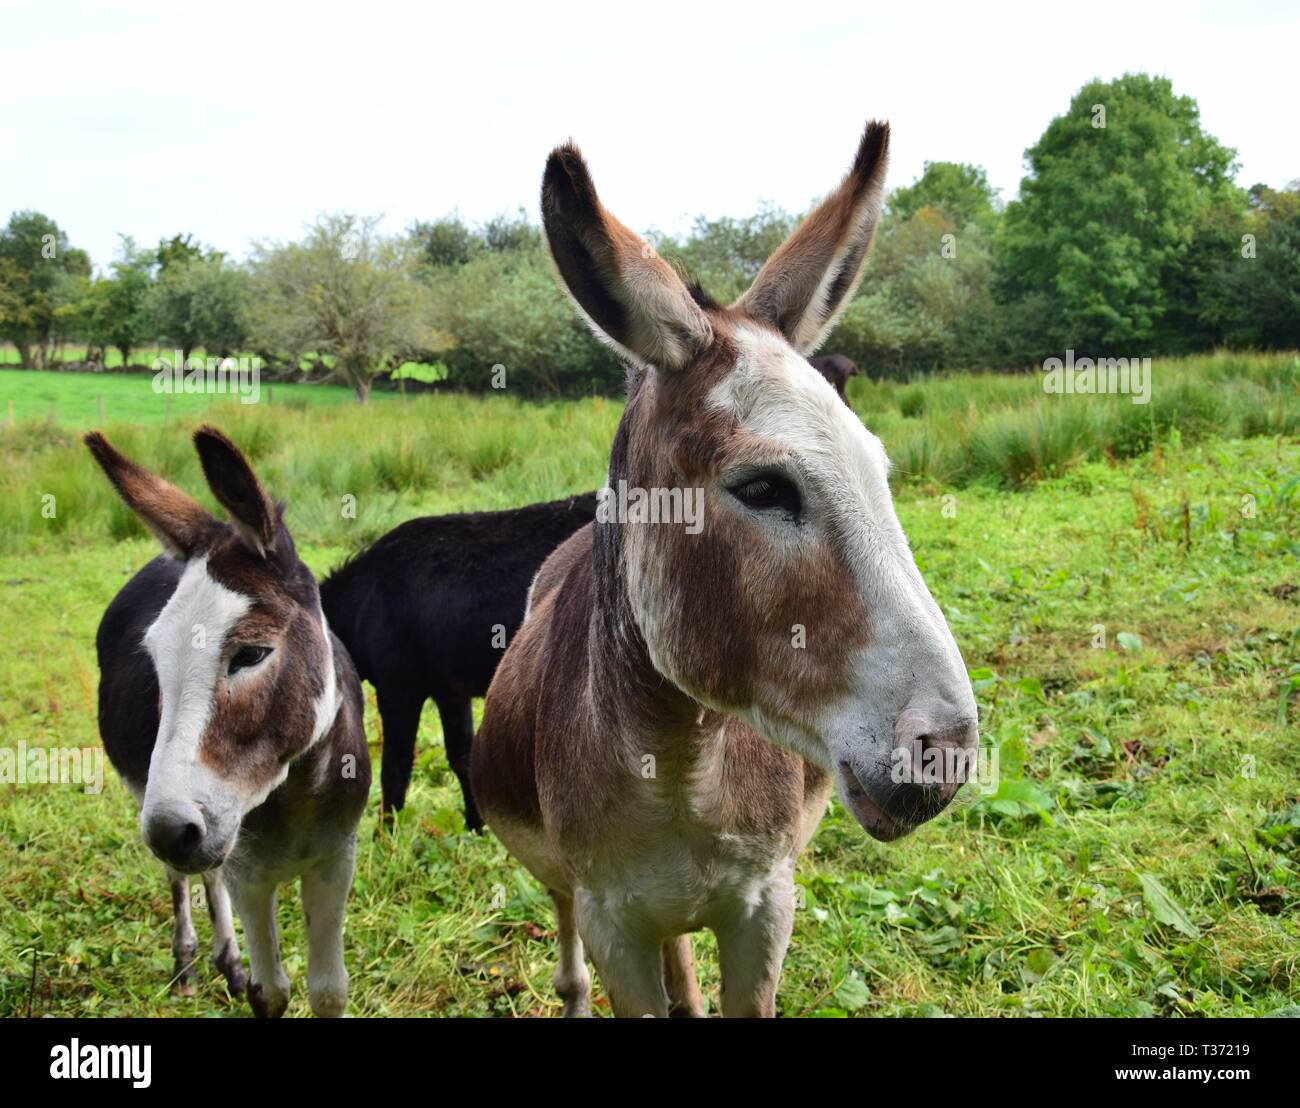 Portrait of a donkey, with other donkeys in the background. Ireland. Stock Photo